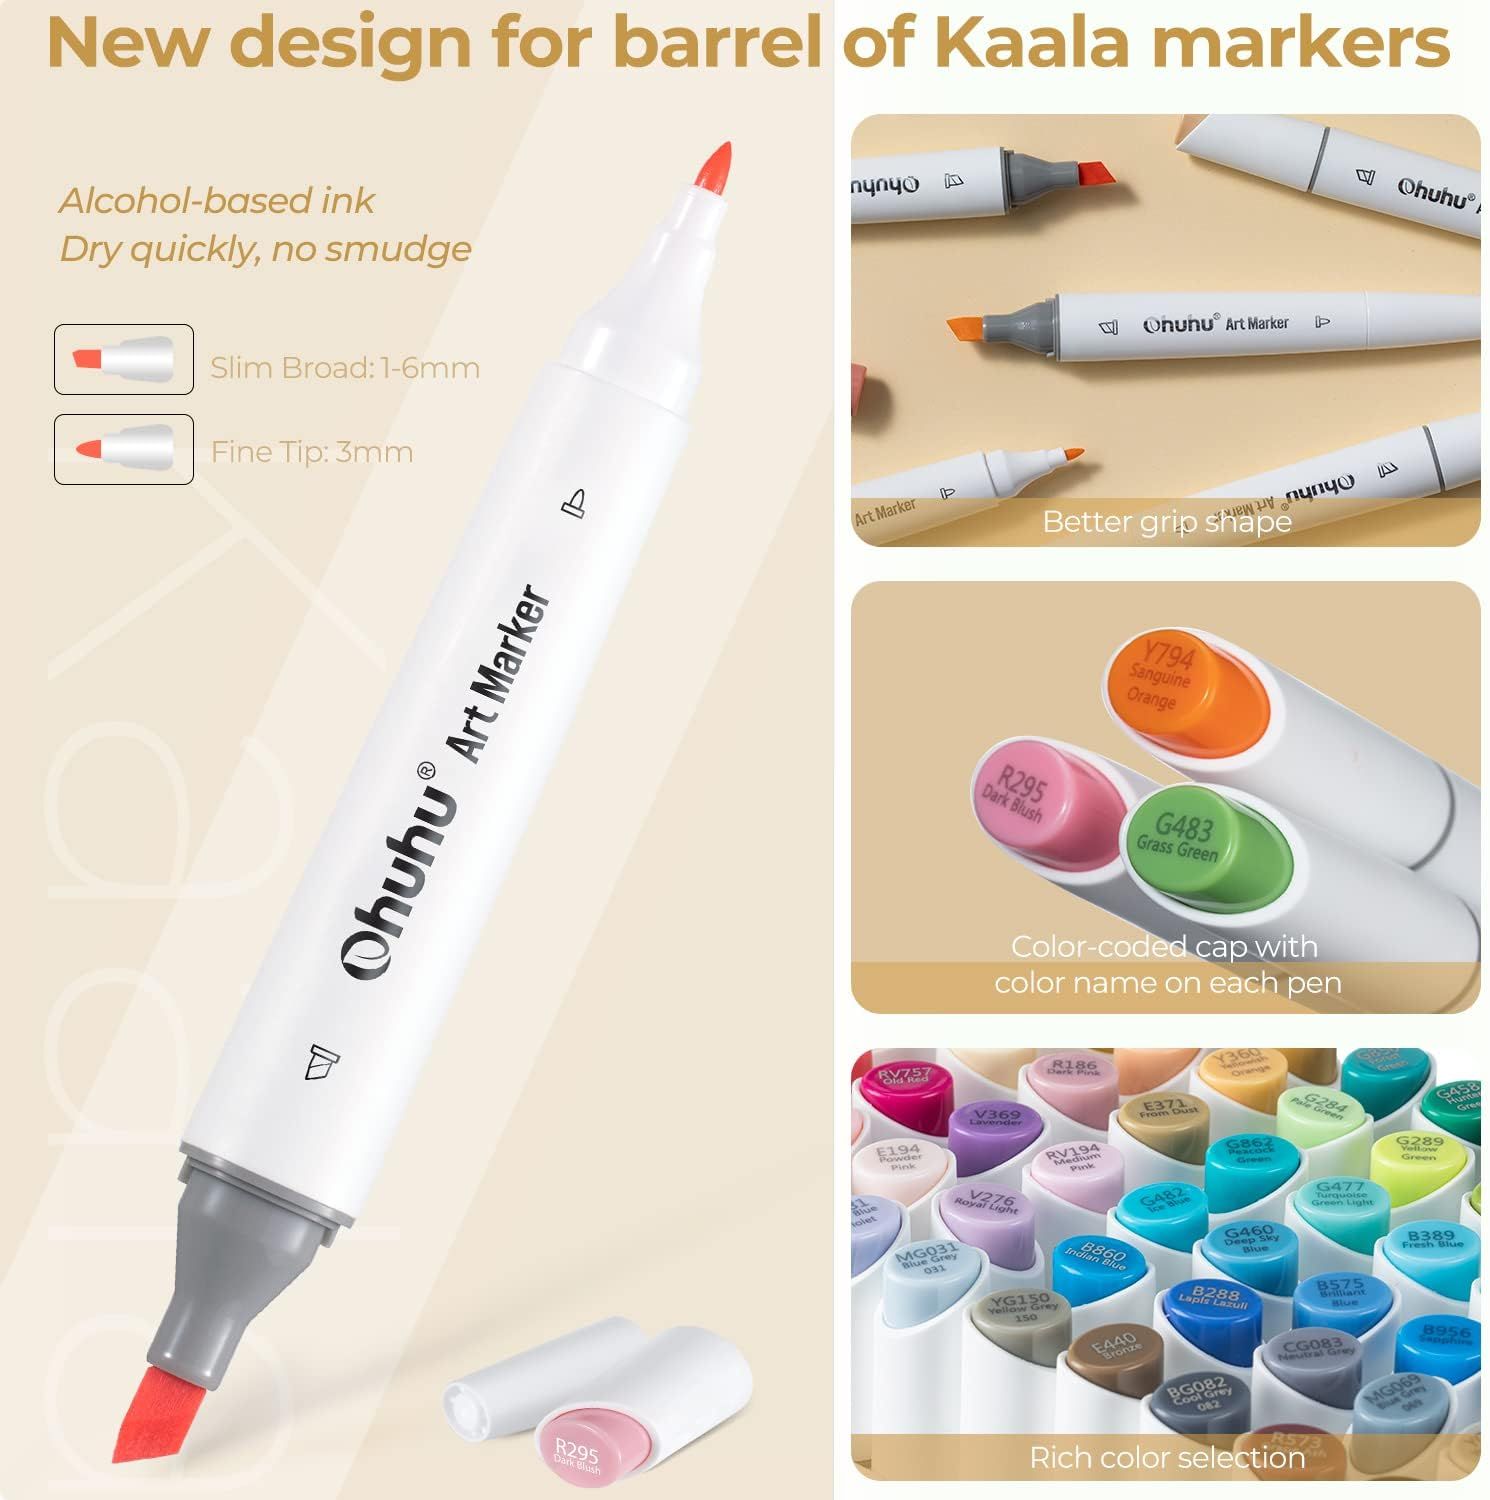 Ohuhu Alcohol Markers 48 Pastel Colors- Double Tipped Art Marker Set for  Artists Adults Coloring Sketching Illustration - Chisel & Fine Dual Tips -  Oahu of Ohuhu Markers - Alcohol-based Refillable Ink 